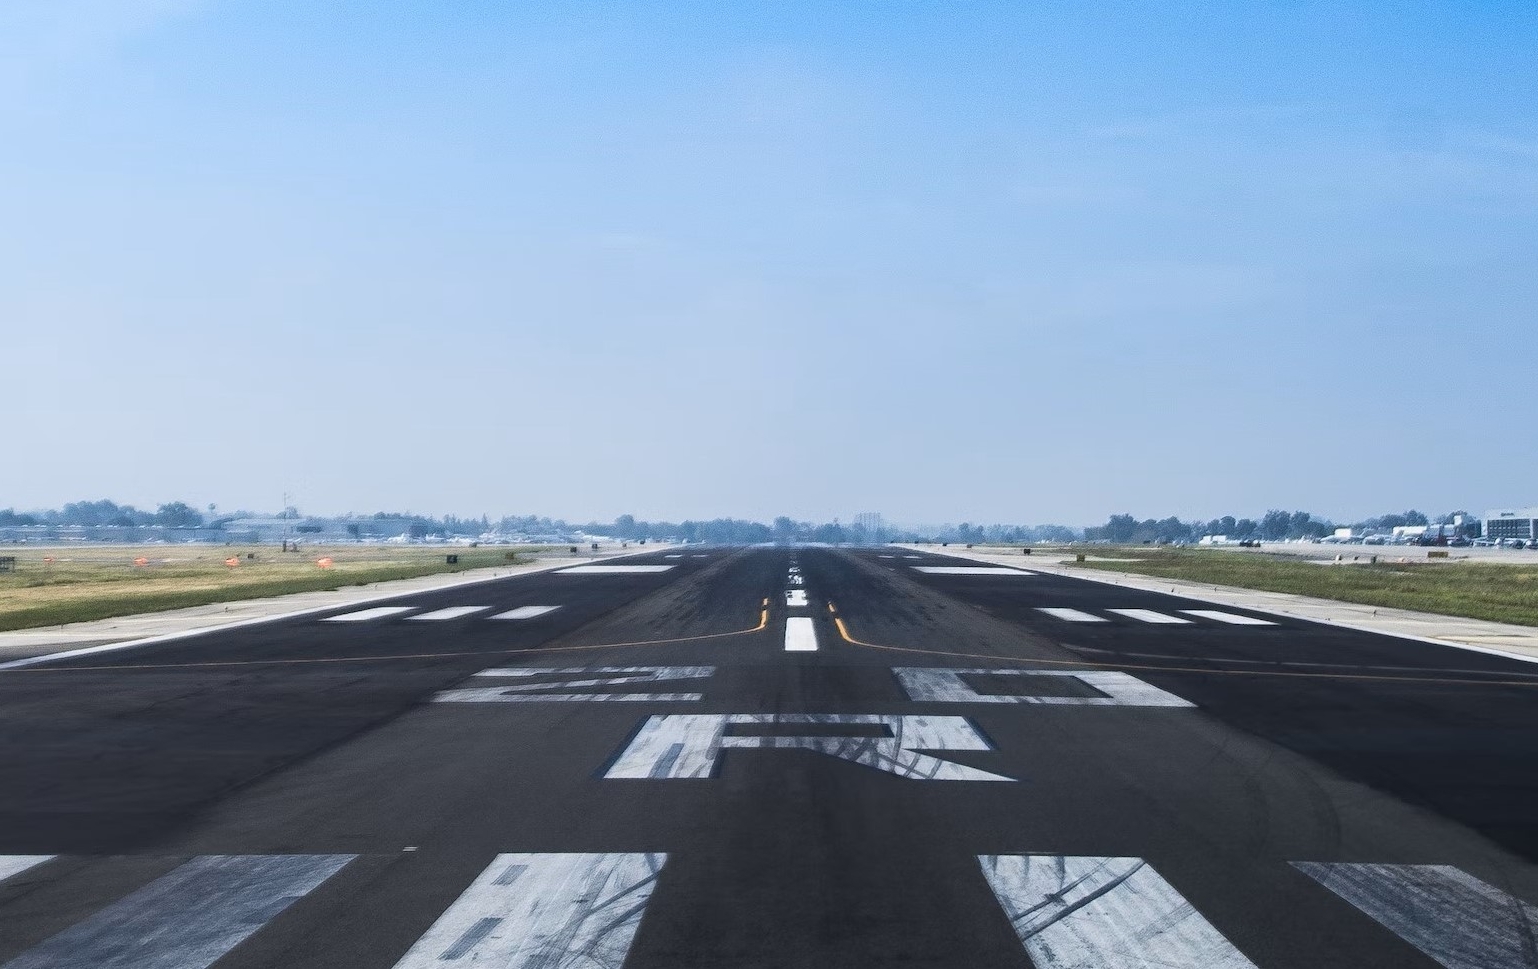 Image showing an empty runway under blue skies.